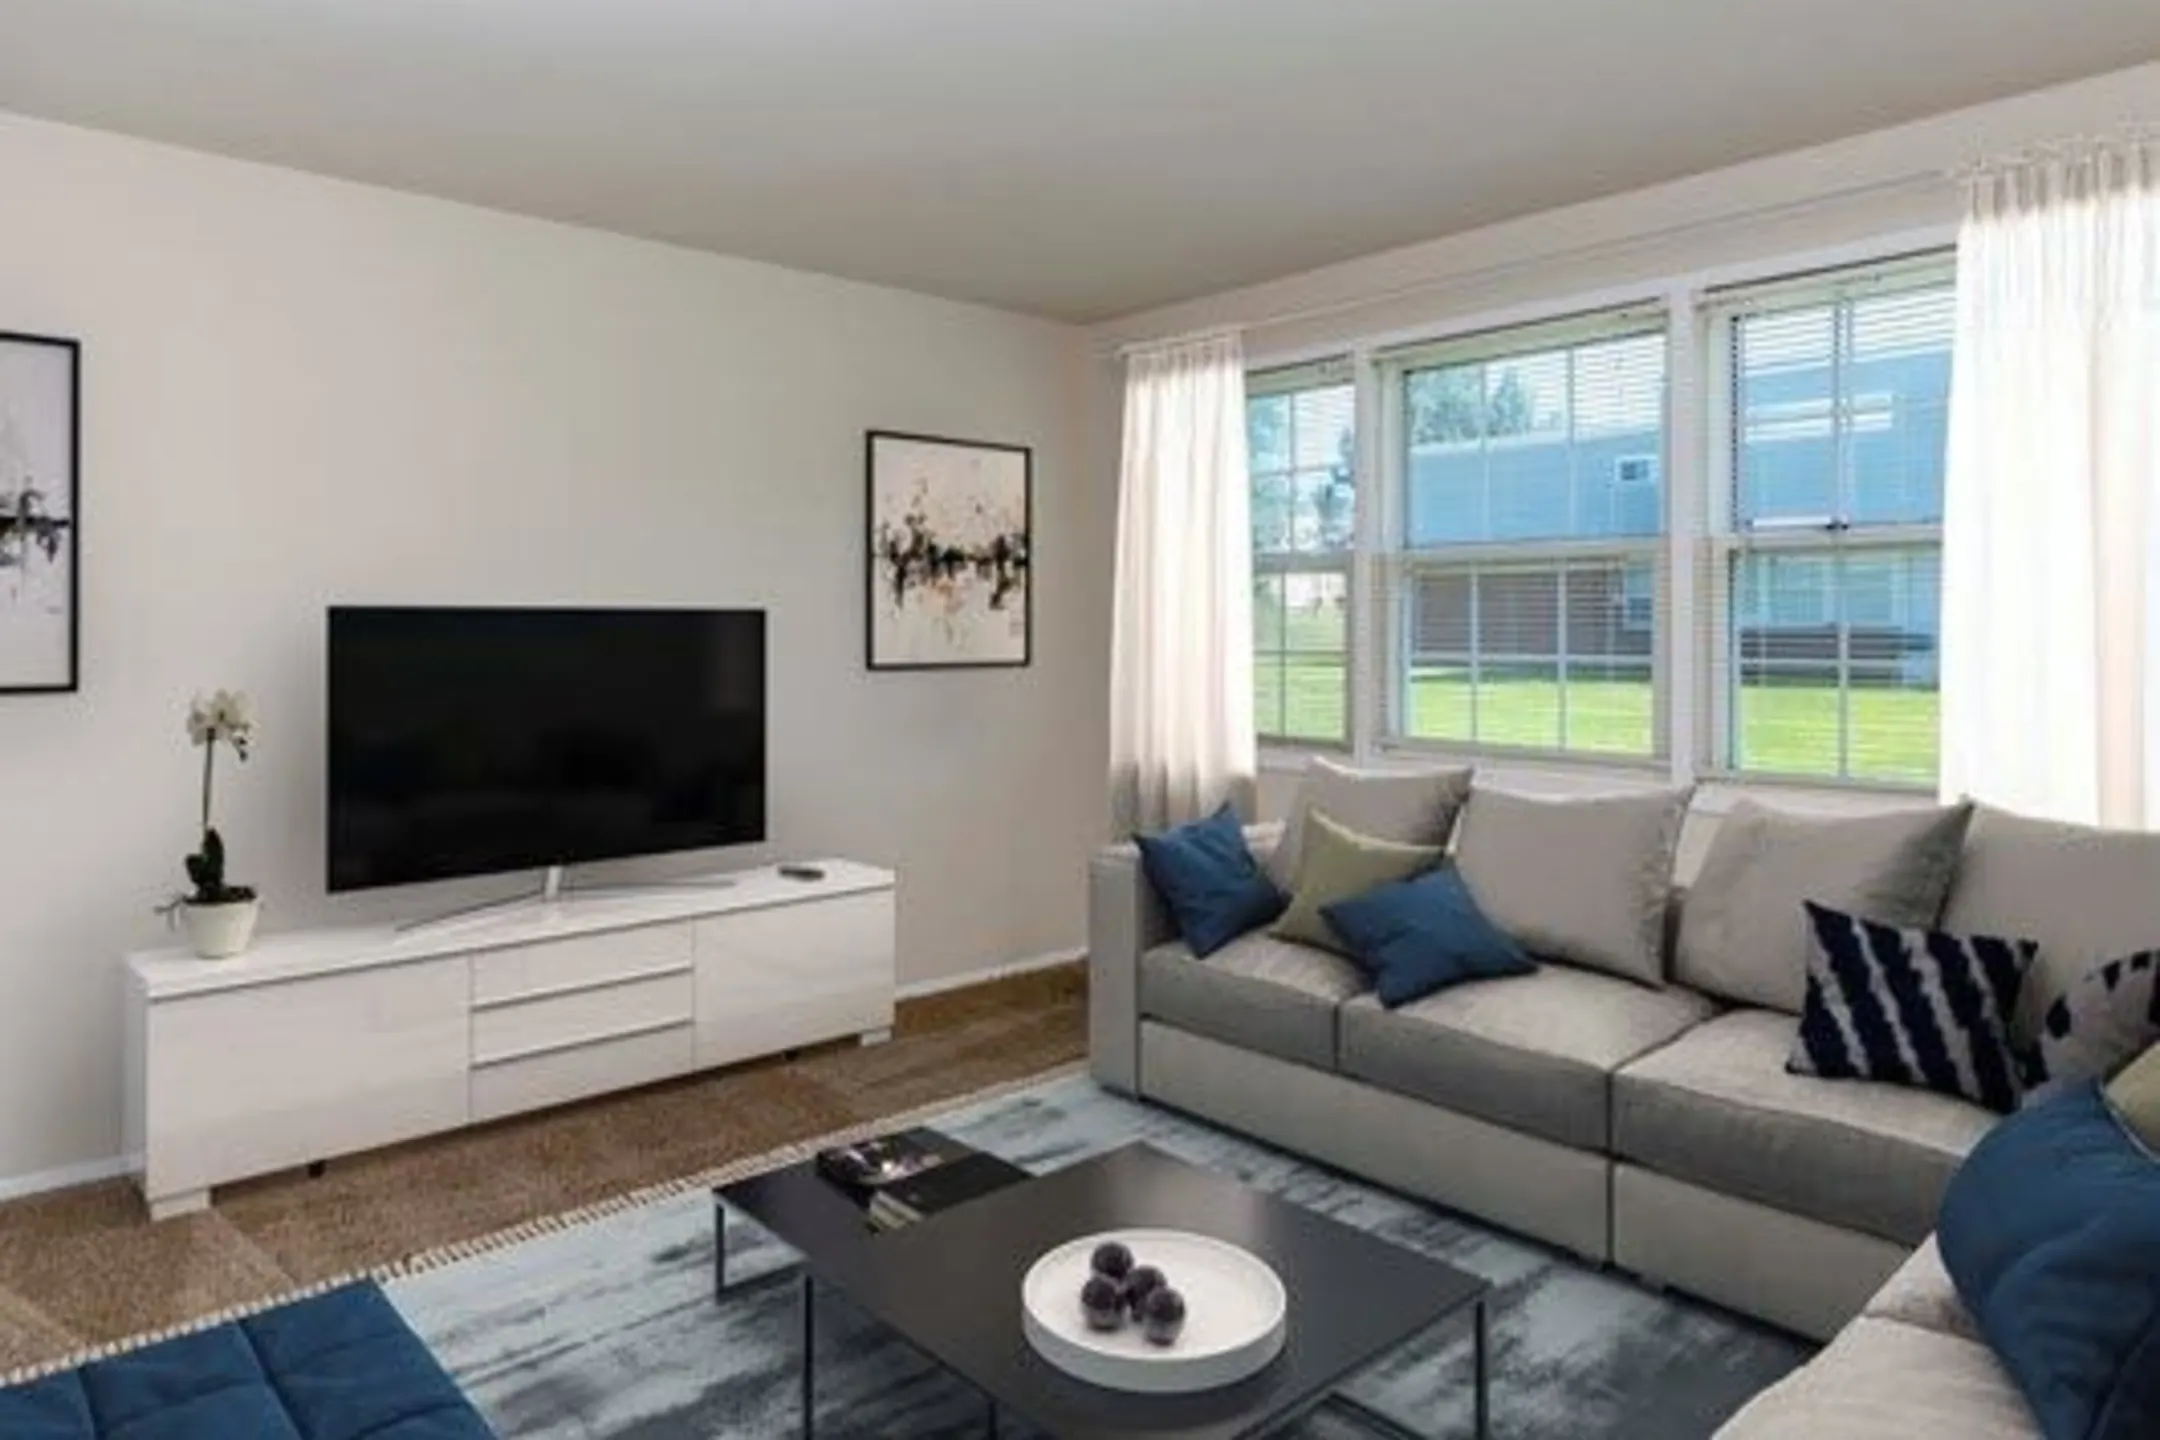 Living Room - Water's Edge Townhomes - Halethorpe, MD